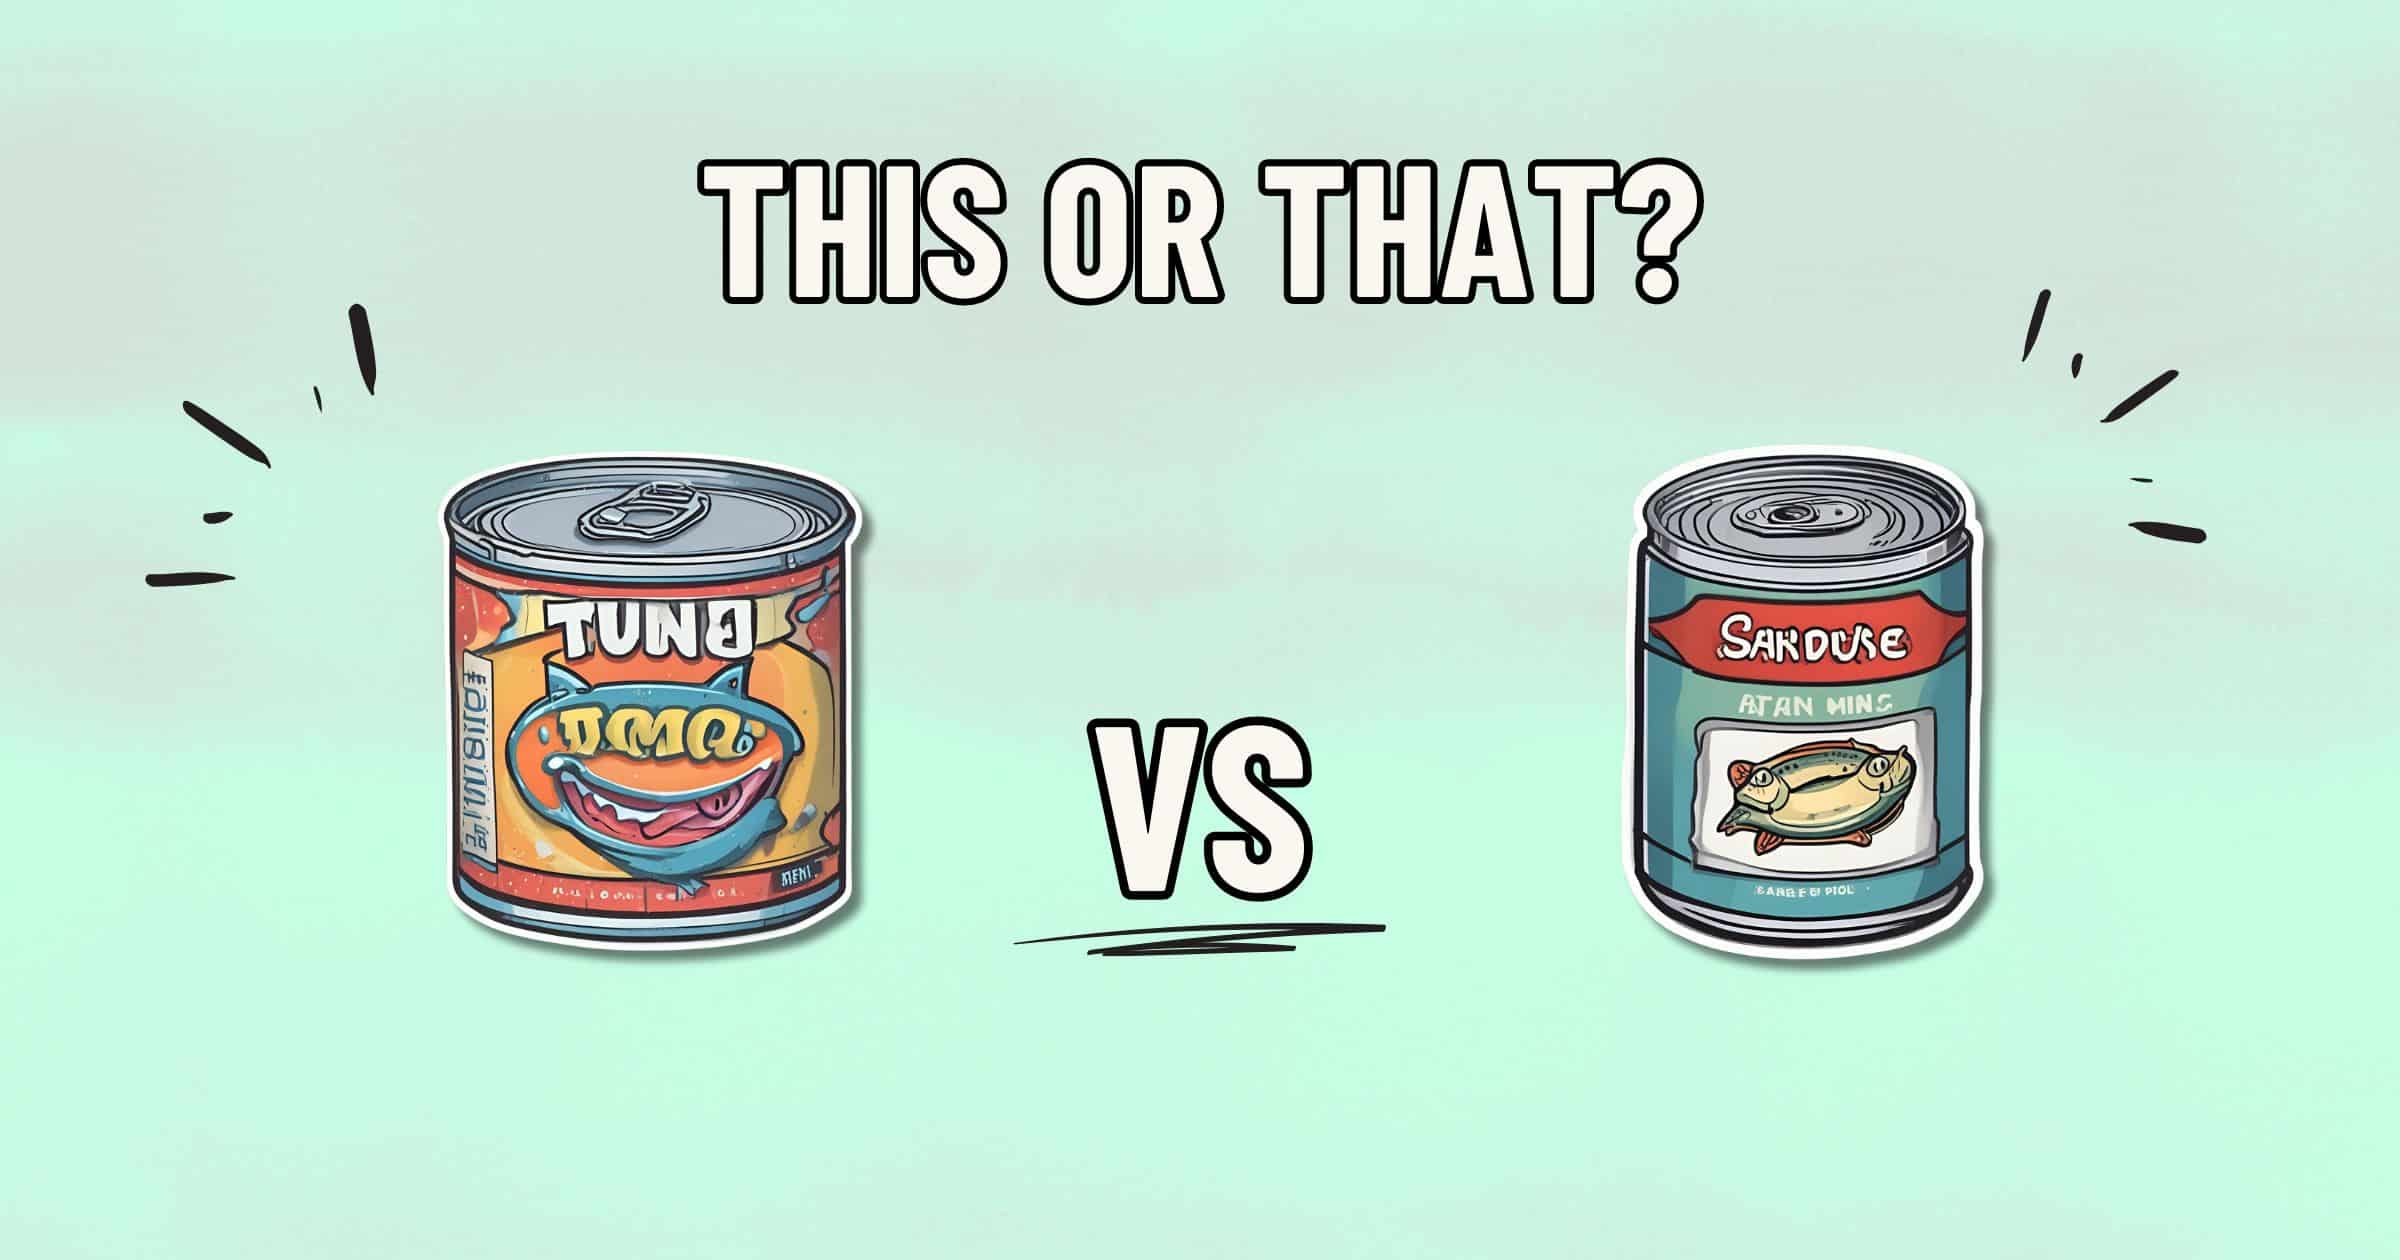 An illustration presenting a choice between two canned fish products. On the left is a can labeled "Canned Tuna" with a cartoon fish logo, and on the right is a can labeled "Canned Sardines" with a fish illustration. The text above reads "This or That?" with "VS" between the cans, prompting you to choose which is healthier.